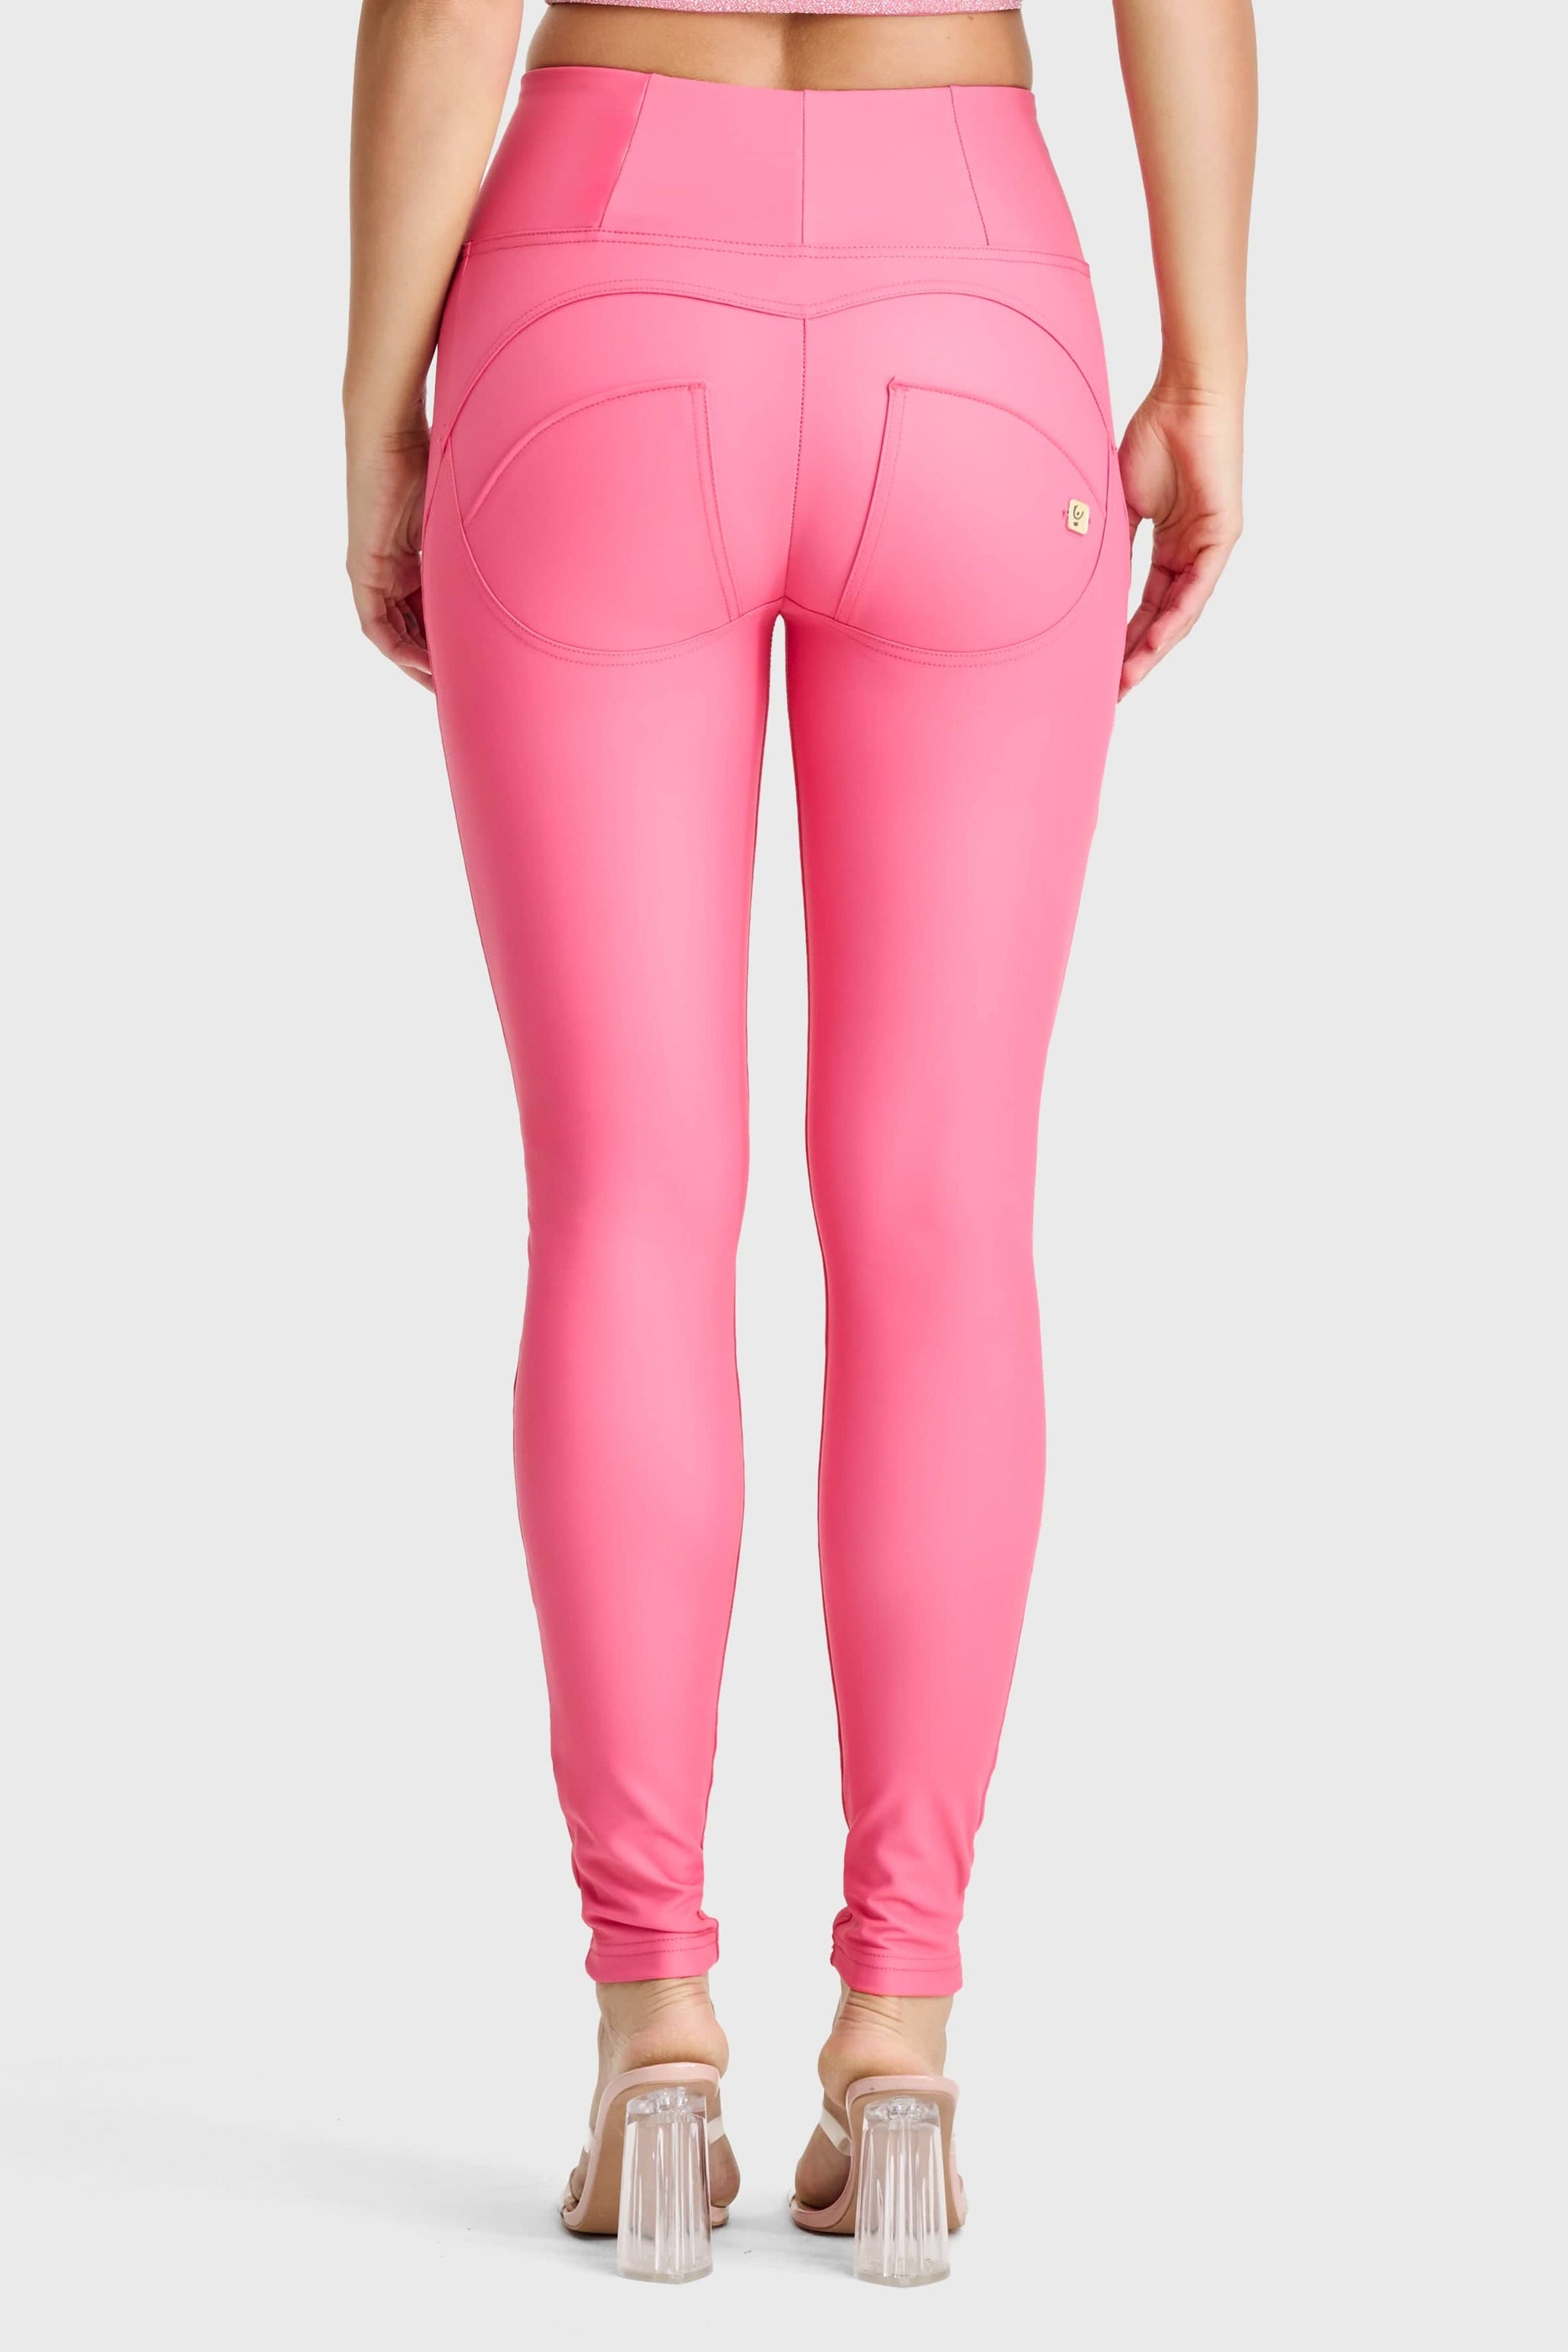 WR.UP® Faux Leather - High Waisted - Full Length - Candy Pink 3